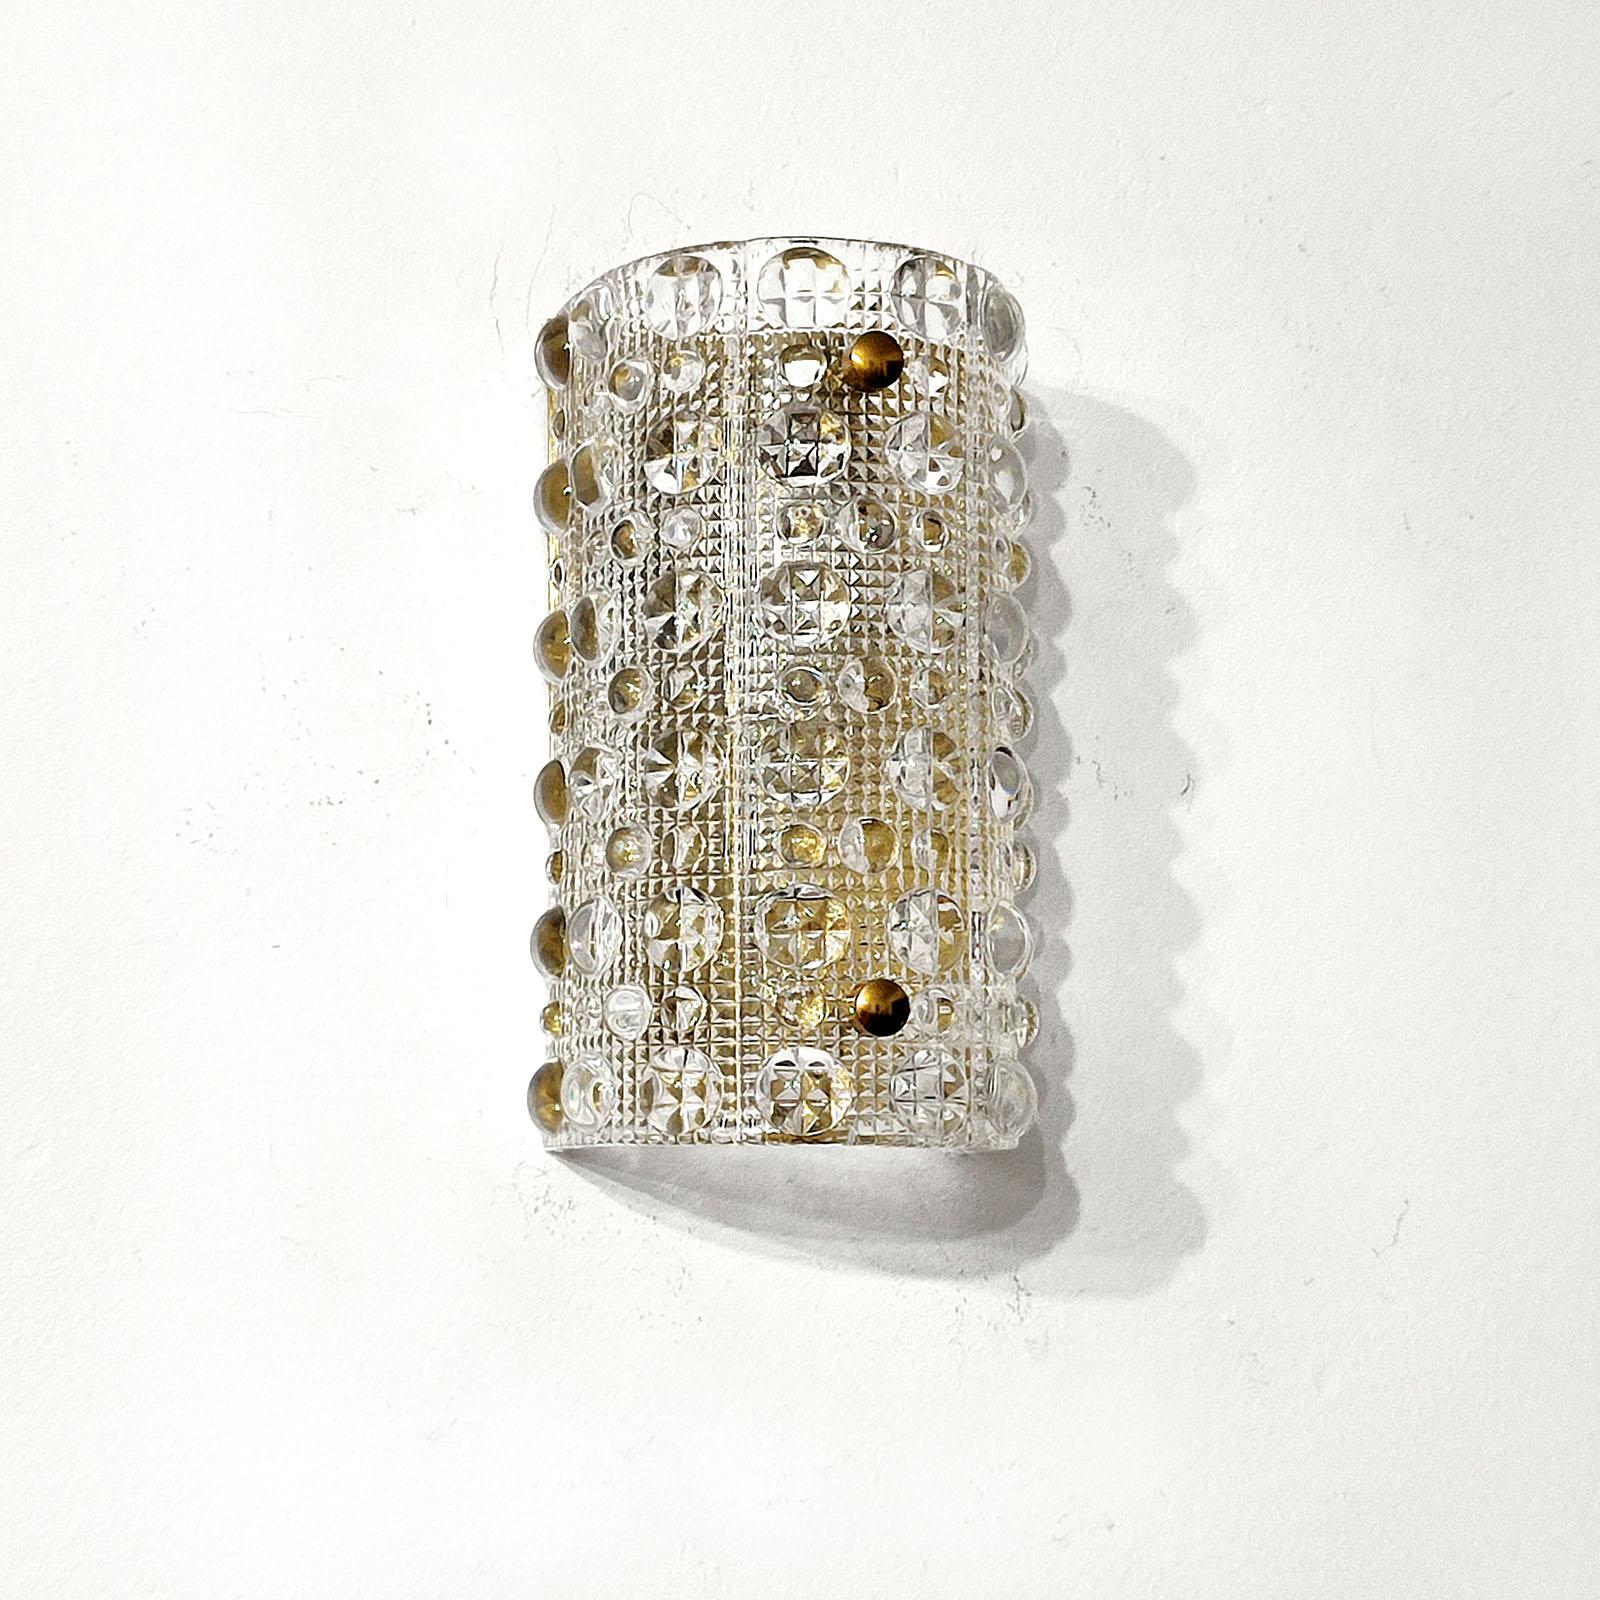 Mid-Century Modern Carl Fagerlund for Orrefors Textured Crystal and Brass Wall Light, Sweden 1950s